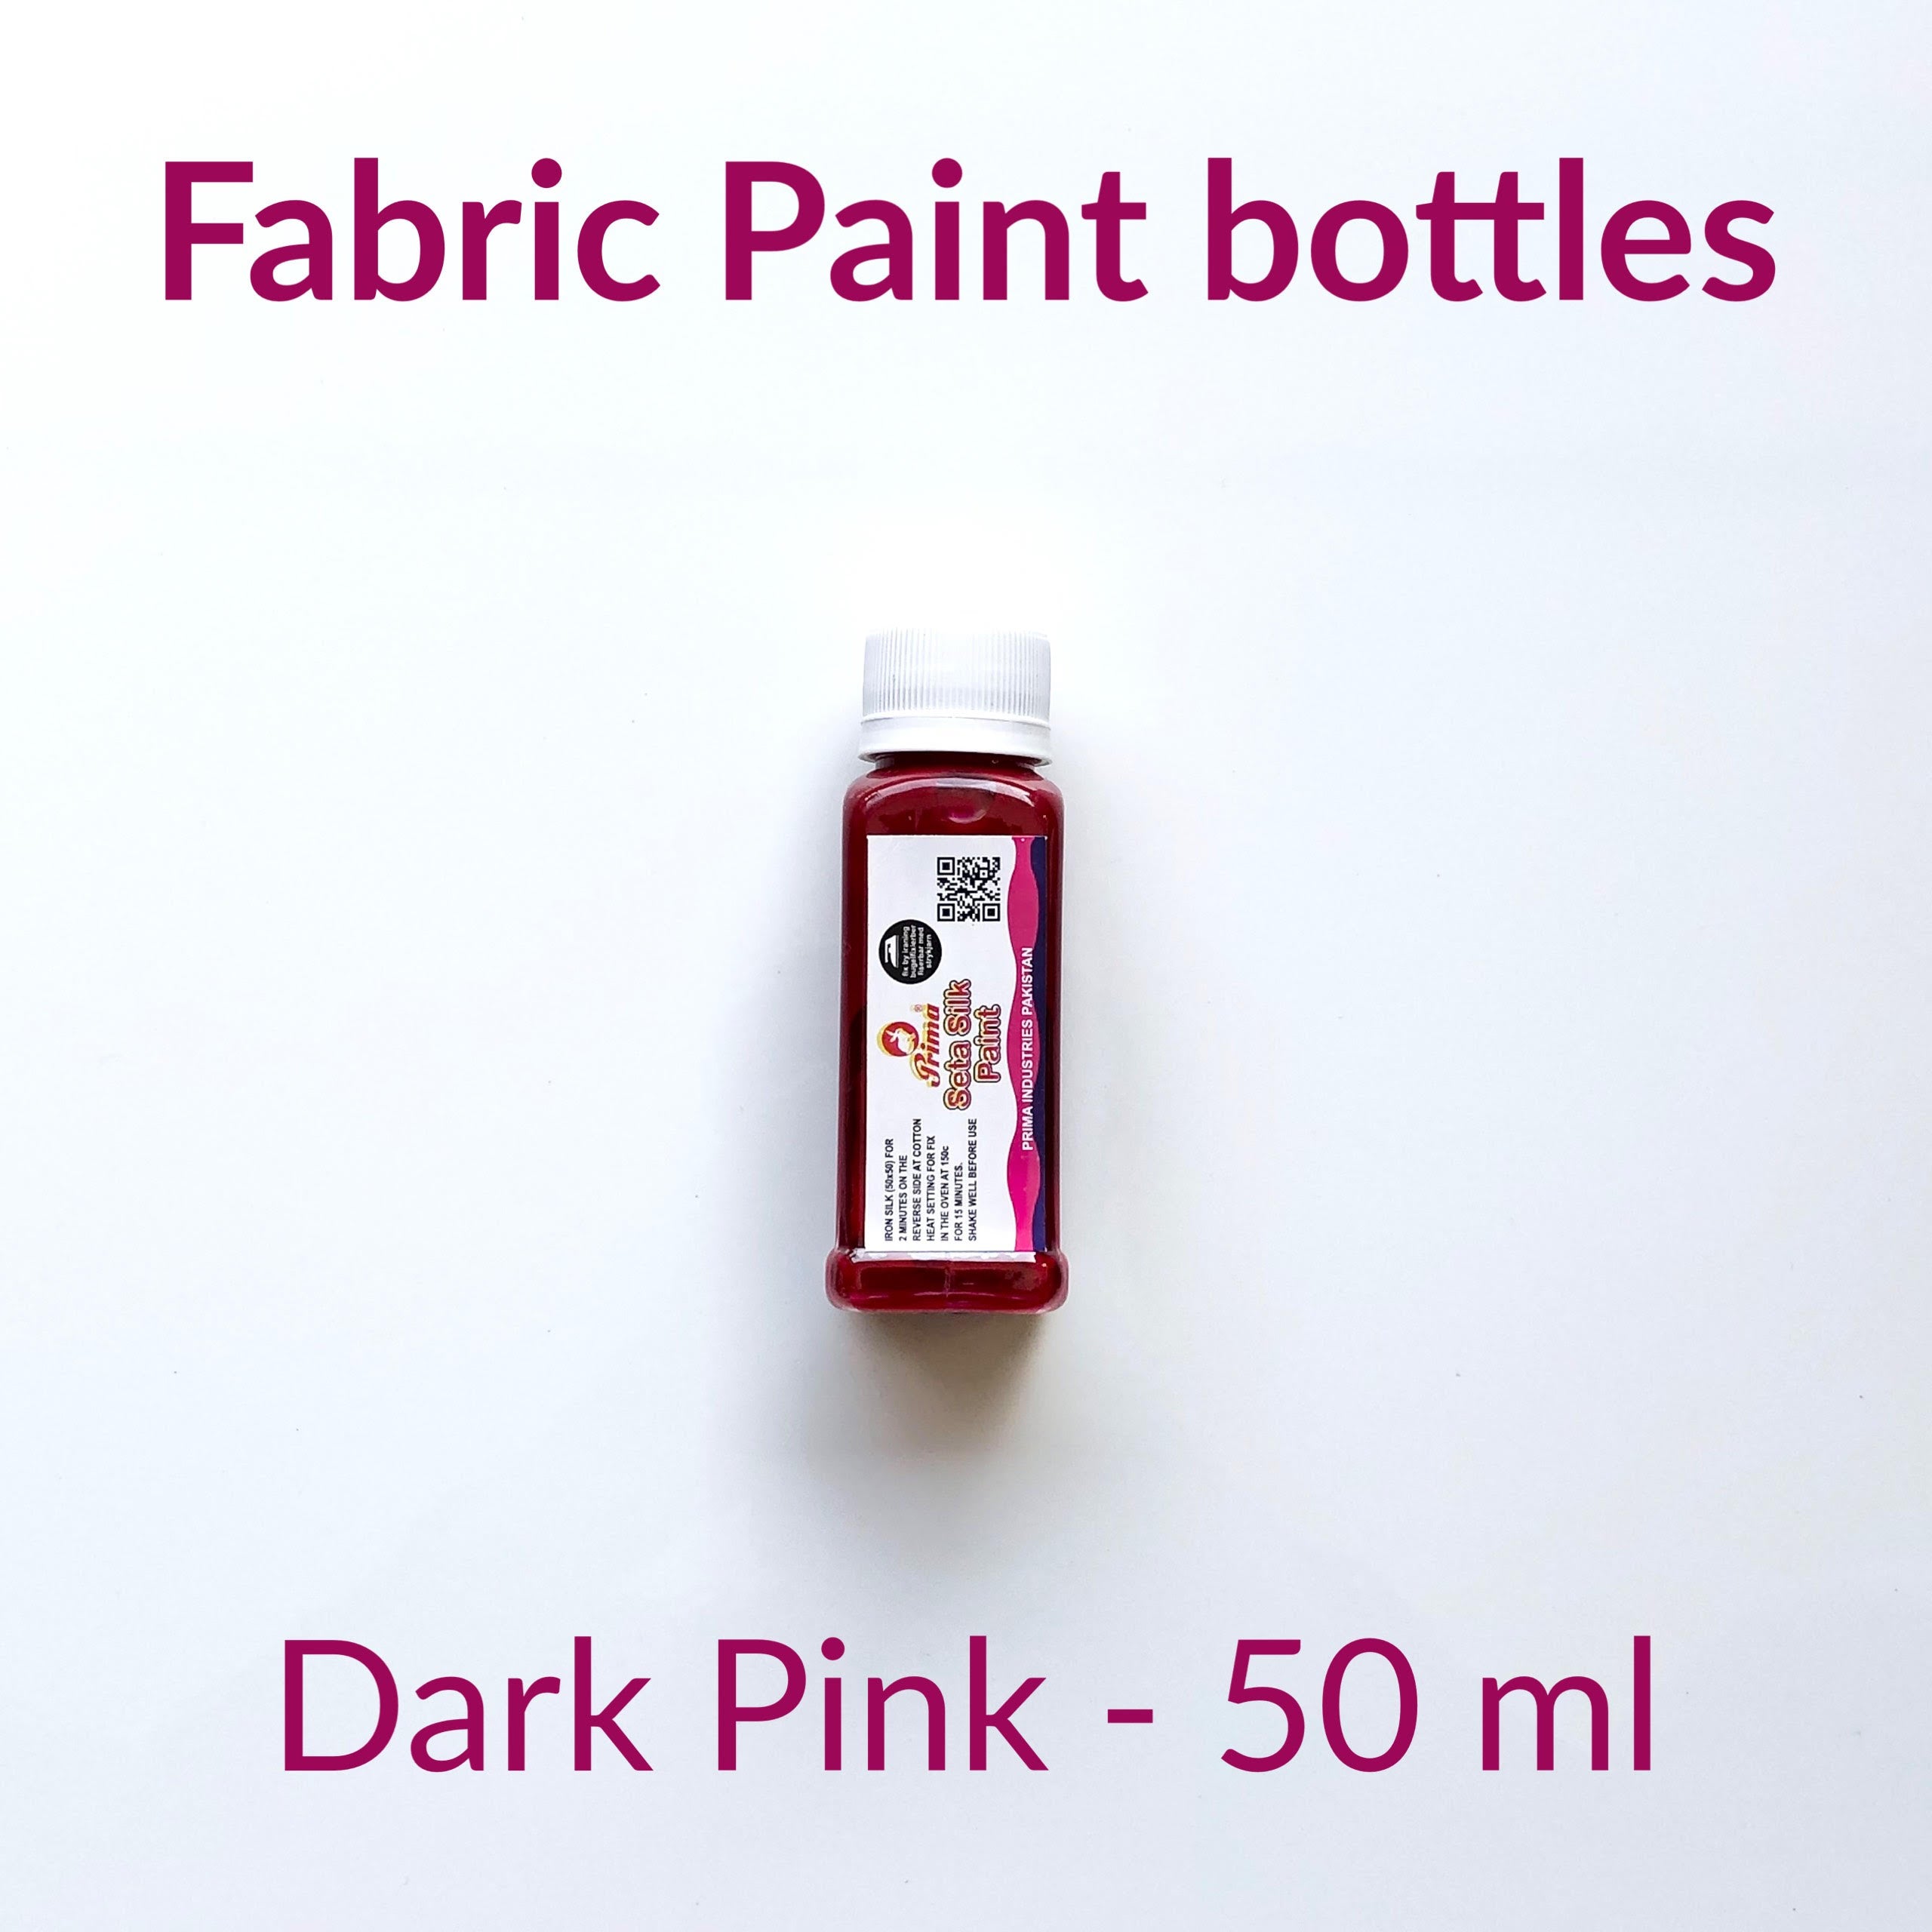 Fabric Paint bottles. 50 ml each bottle. Available in different